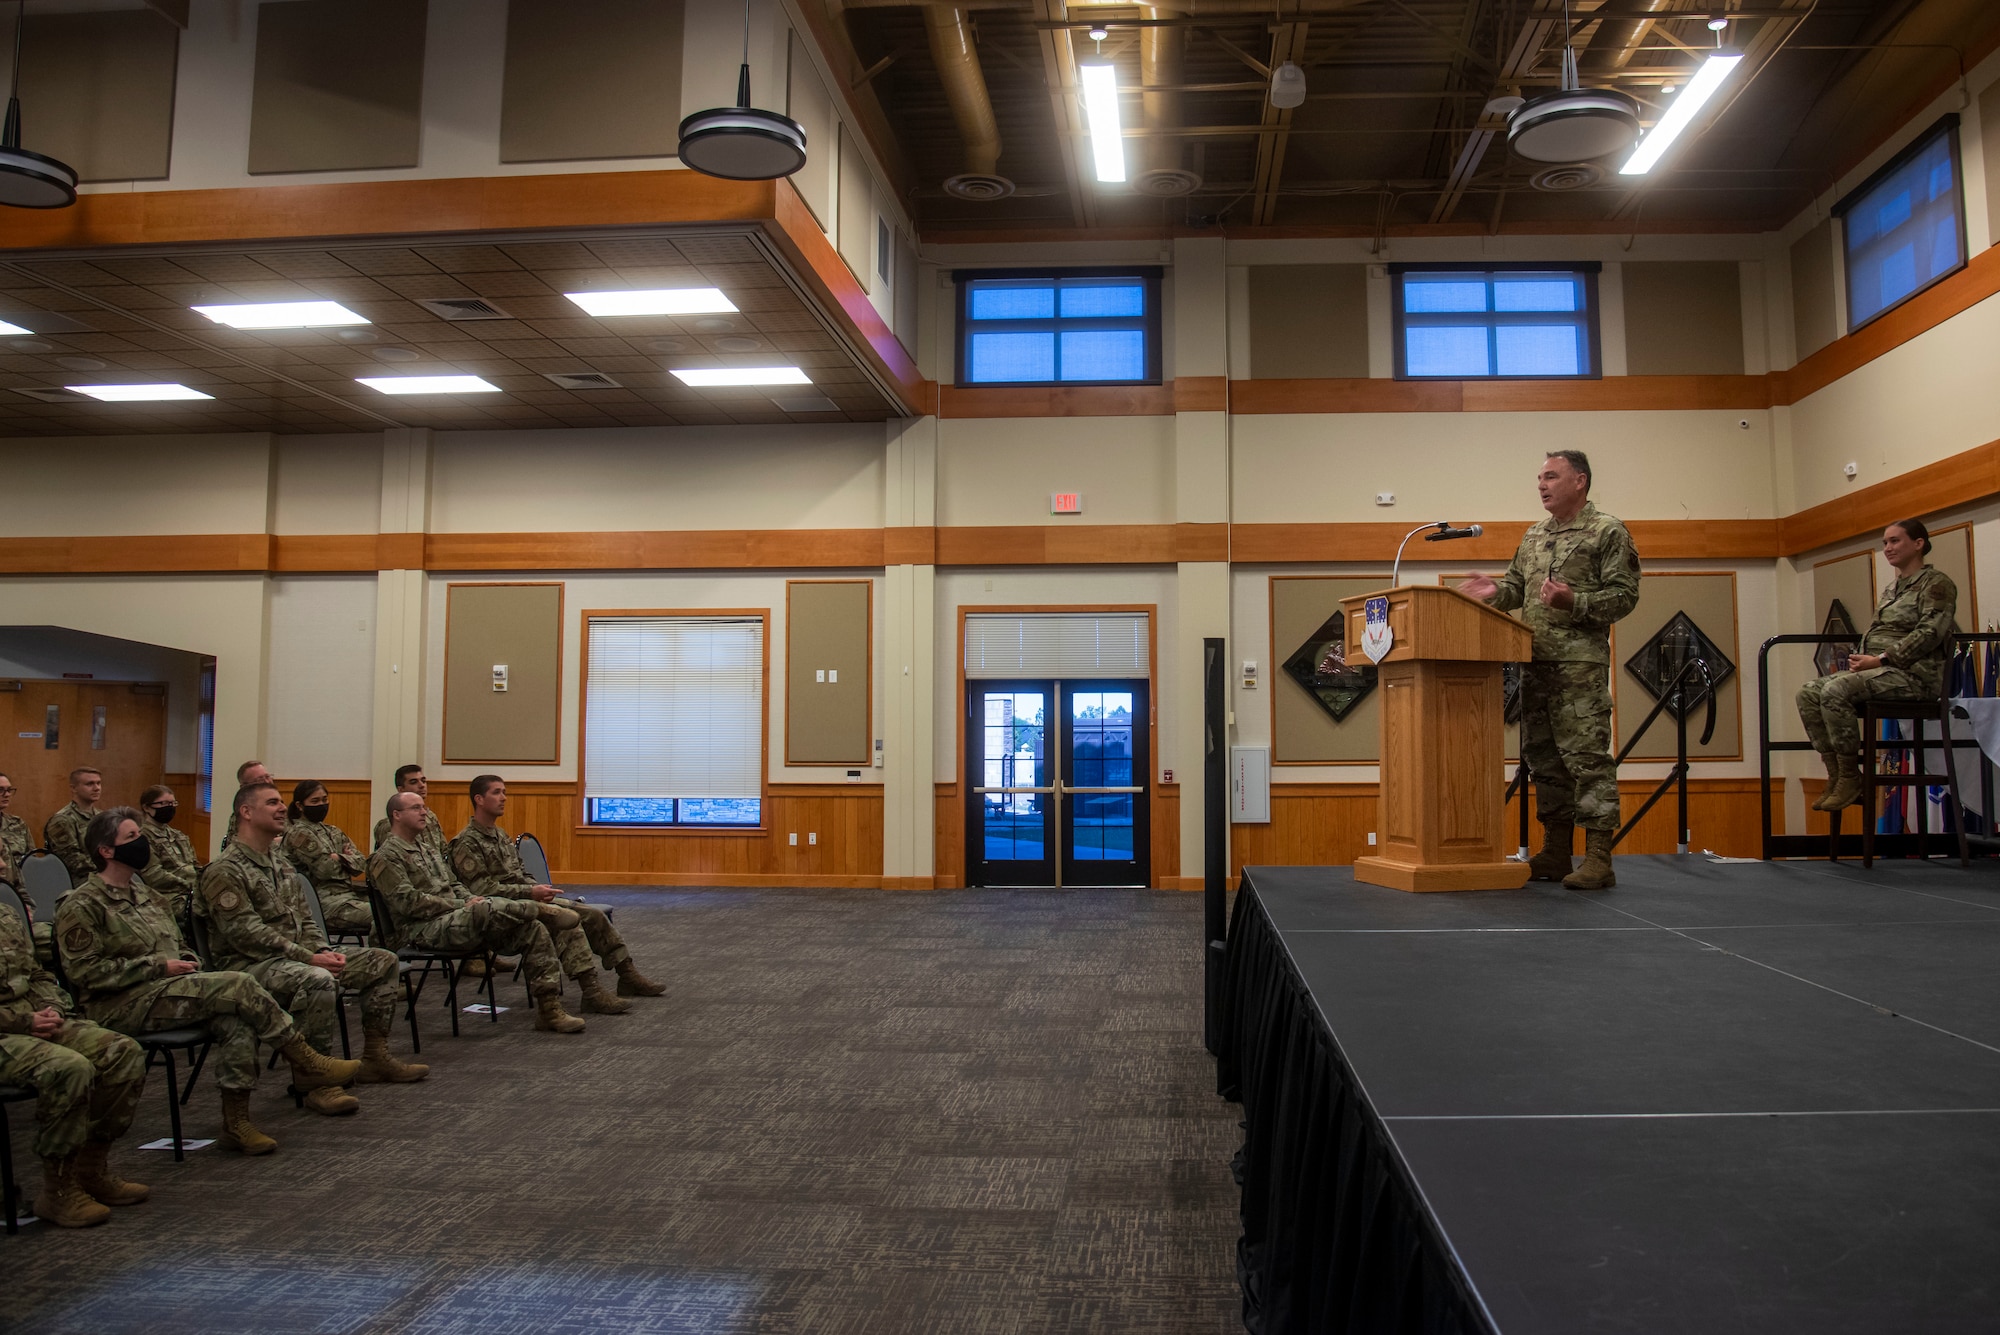 Lt. Col. Darren Damiani, 341st OMRS incoming commander, addresses his squadron for the first time after assuming command during a change of command ceremony June 16, 2021 at Malmstrom Air Force Base, Mont.